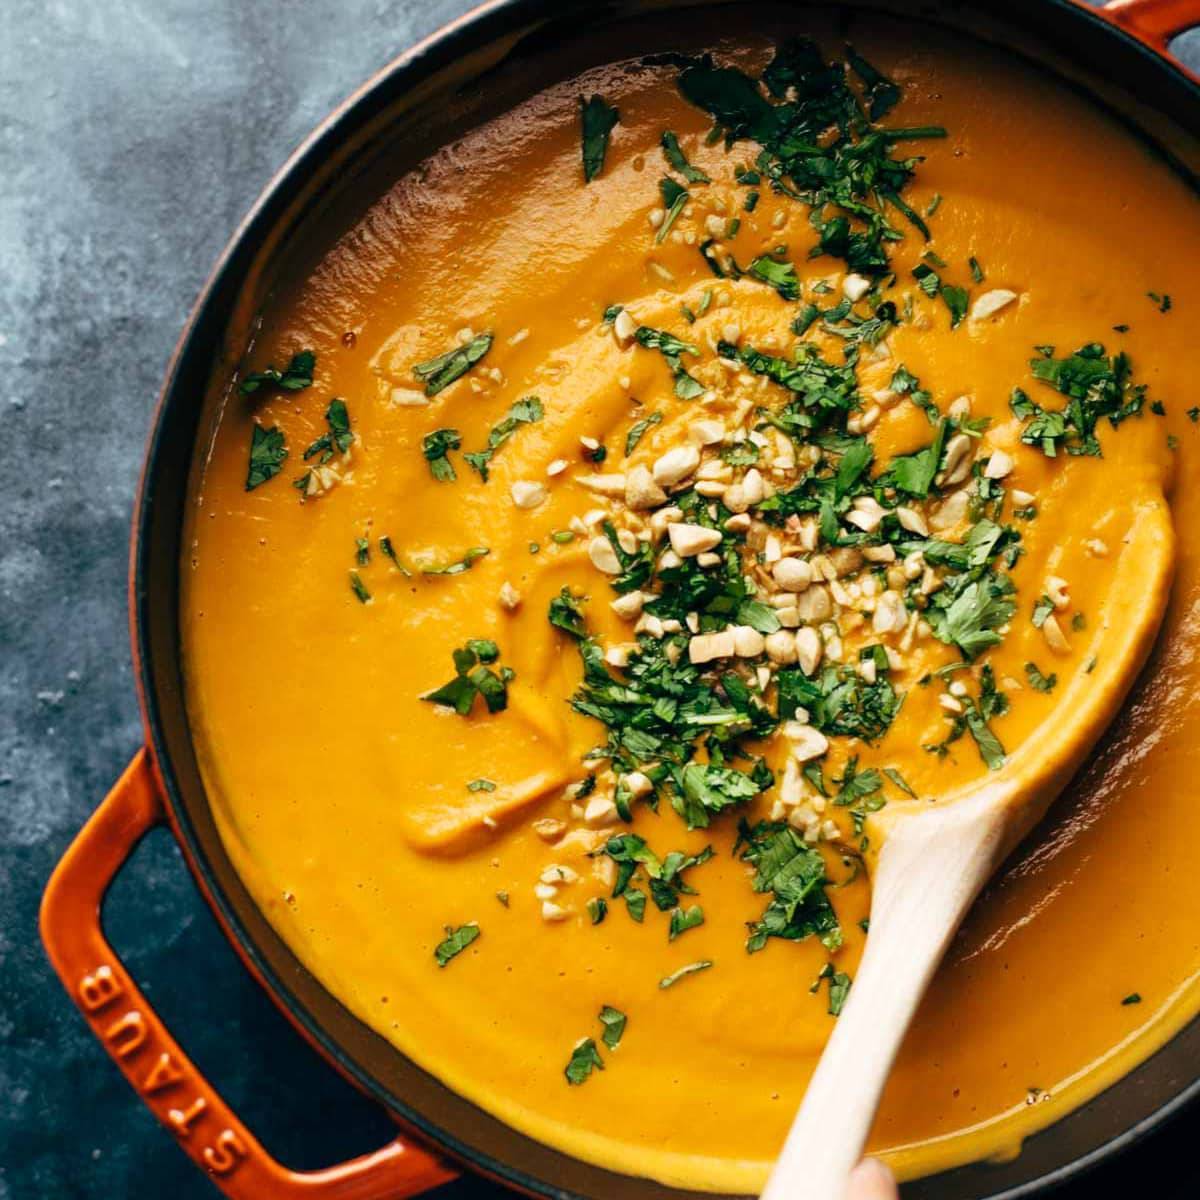 Spicy Carrot Soup in pot with wooden spoon.